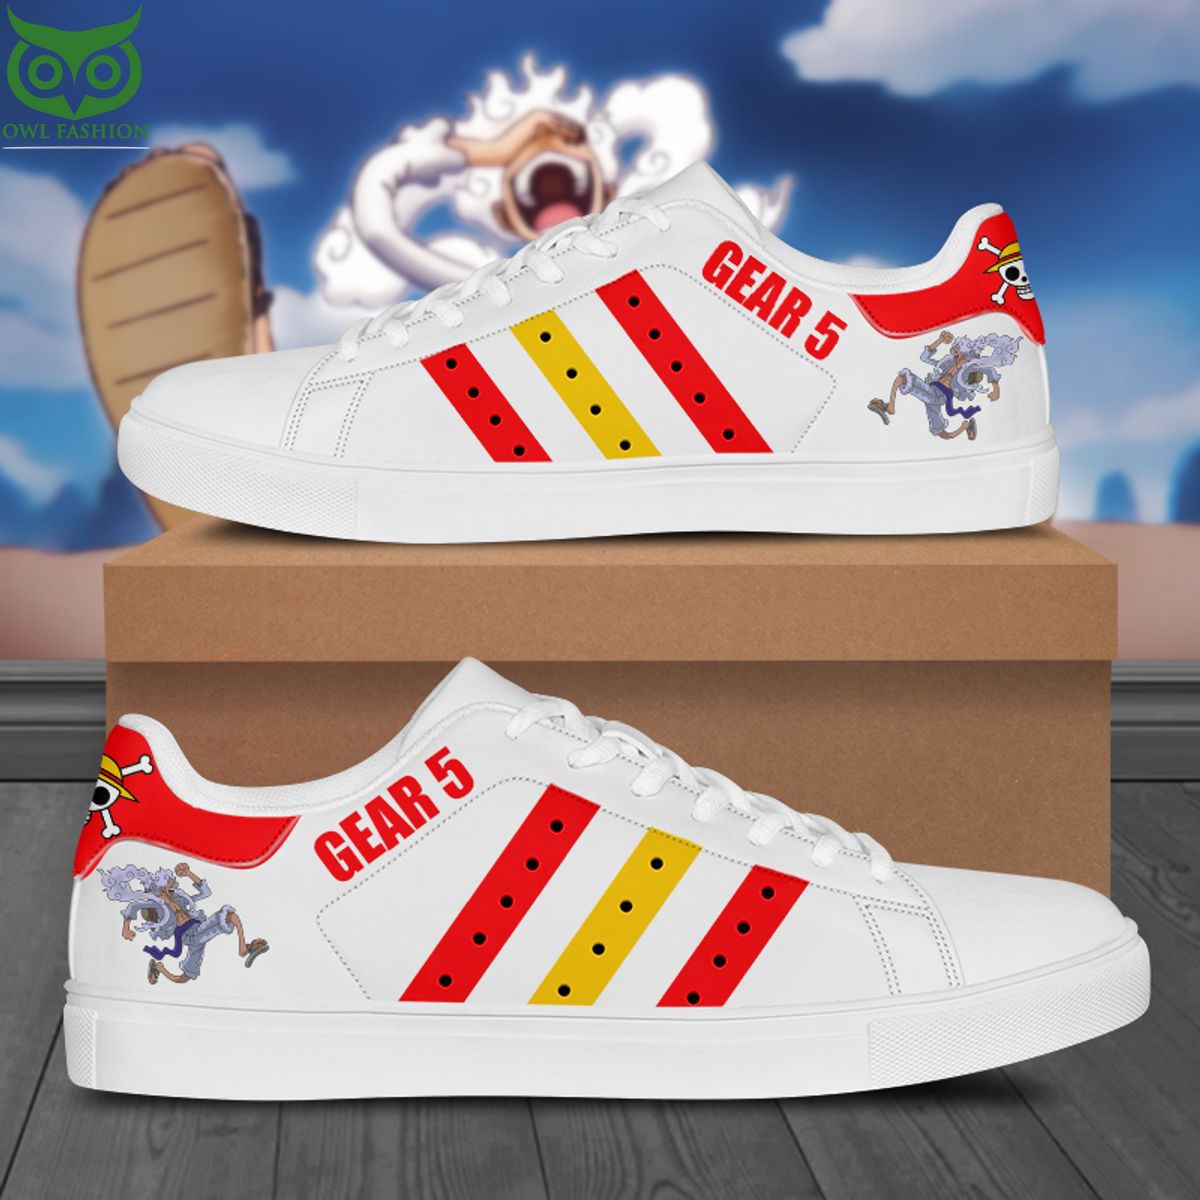 Trending Luffy Gear 5 Stan Smith Skate Shoes You look different and cute